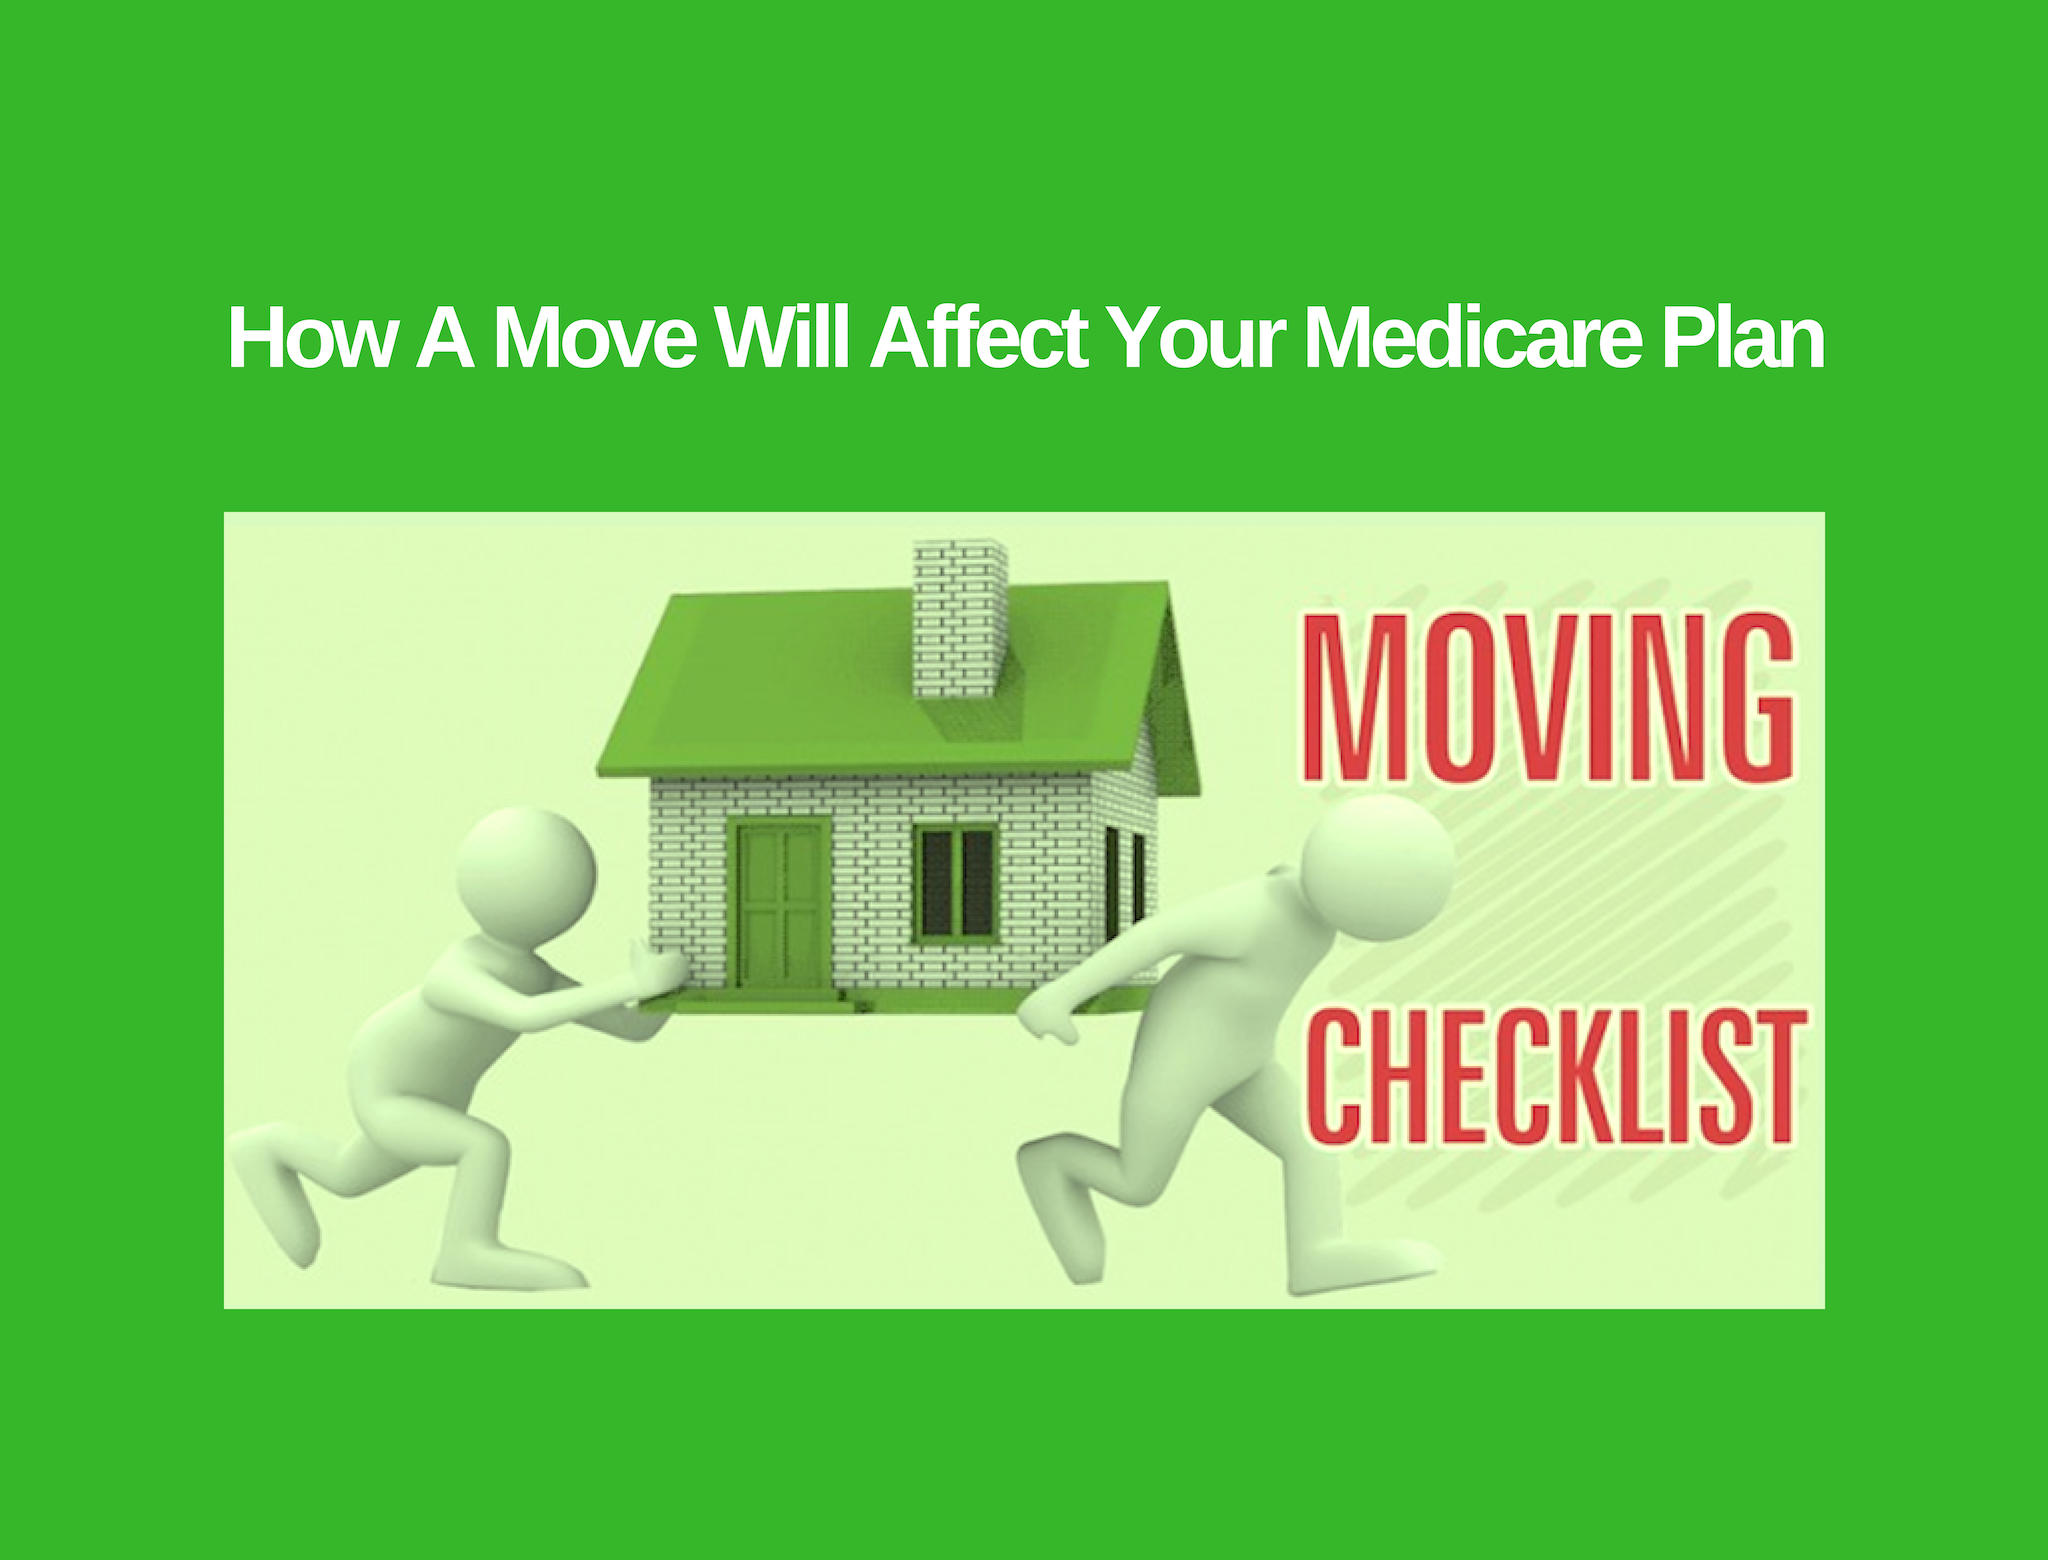 Medicare & Moving: What You Need To Know